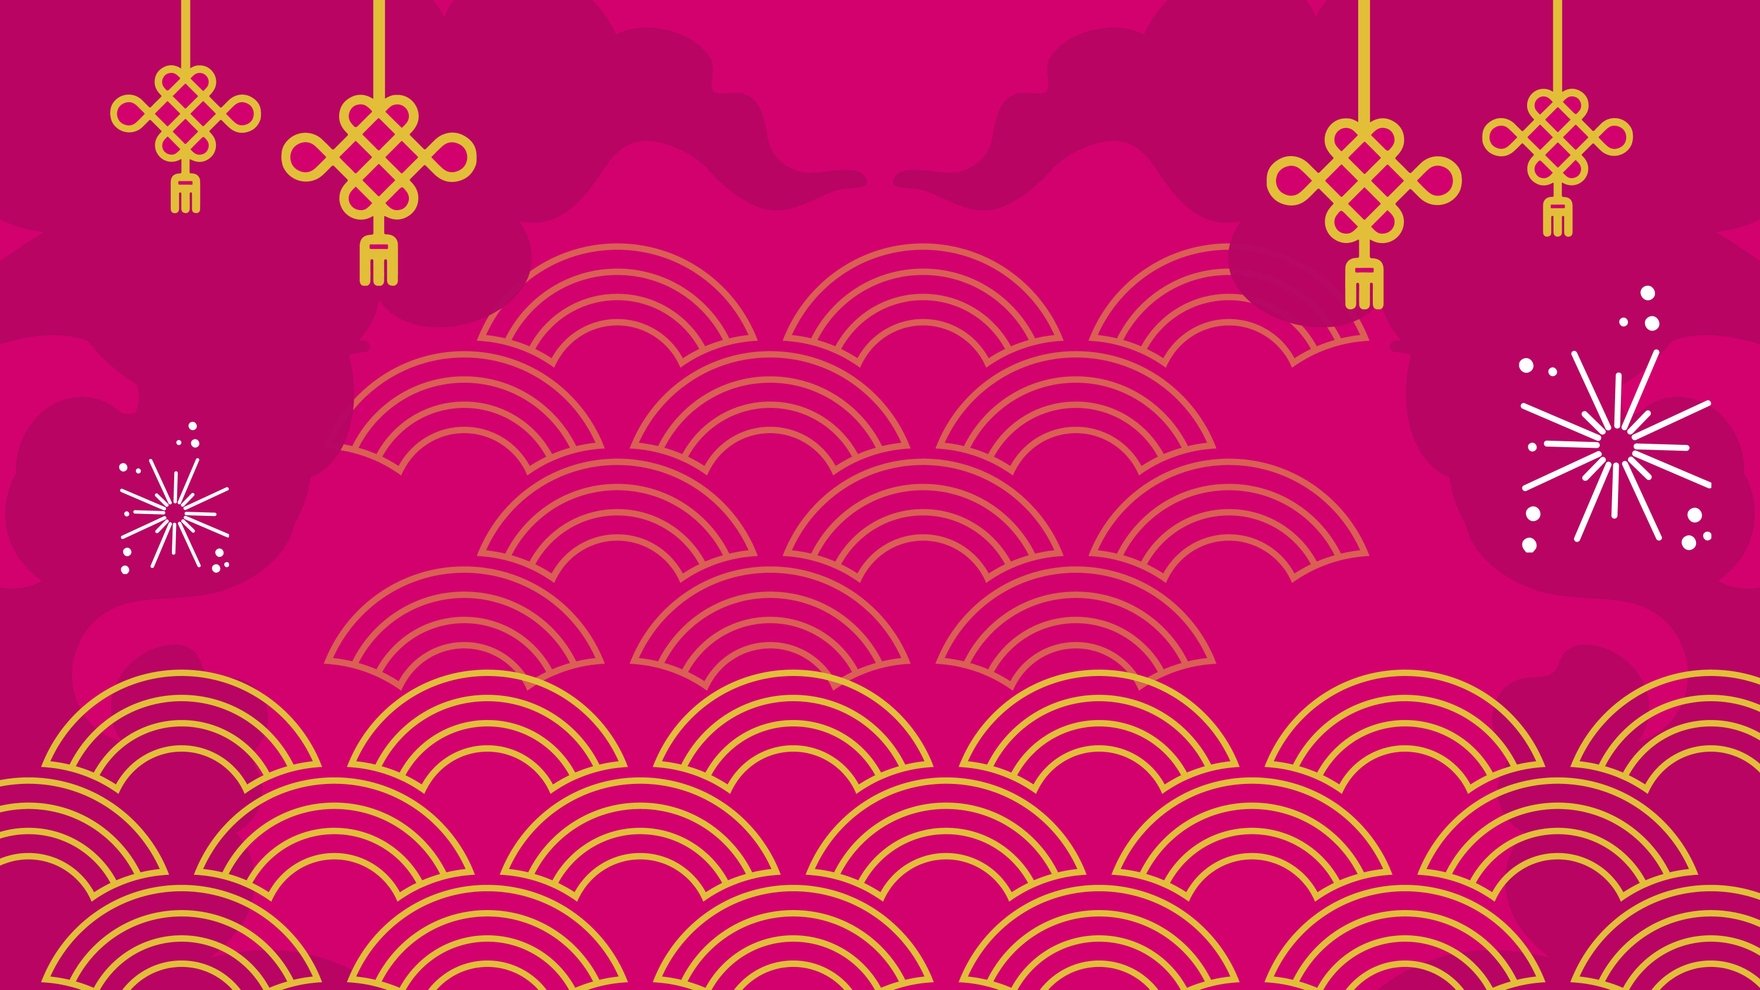 Chinese New Year Abstract Background in PDF, Illustrator, PSD, EPS, SVG, JPG, PNG